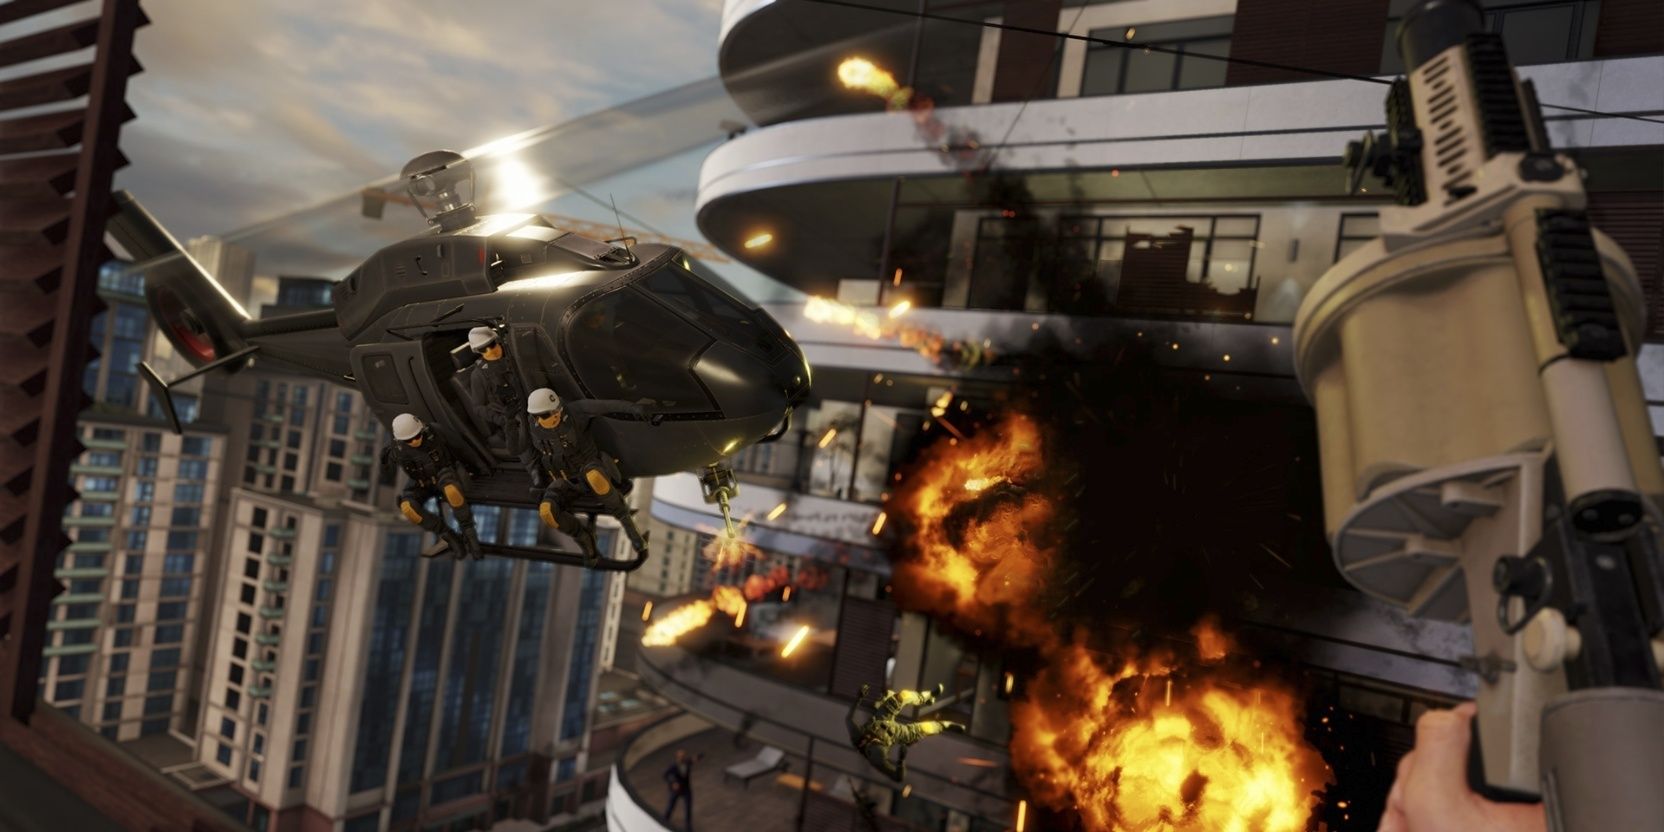 The player shooting down a helicopter in Blood & Truth